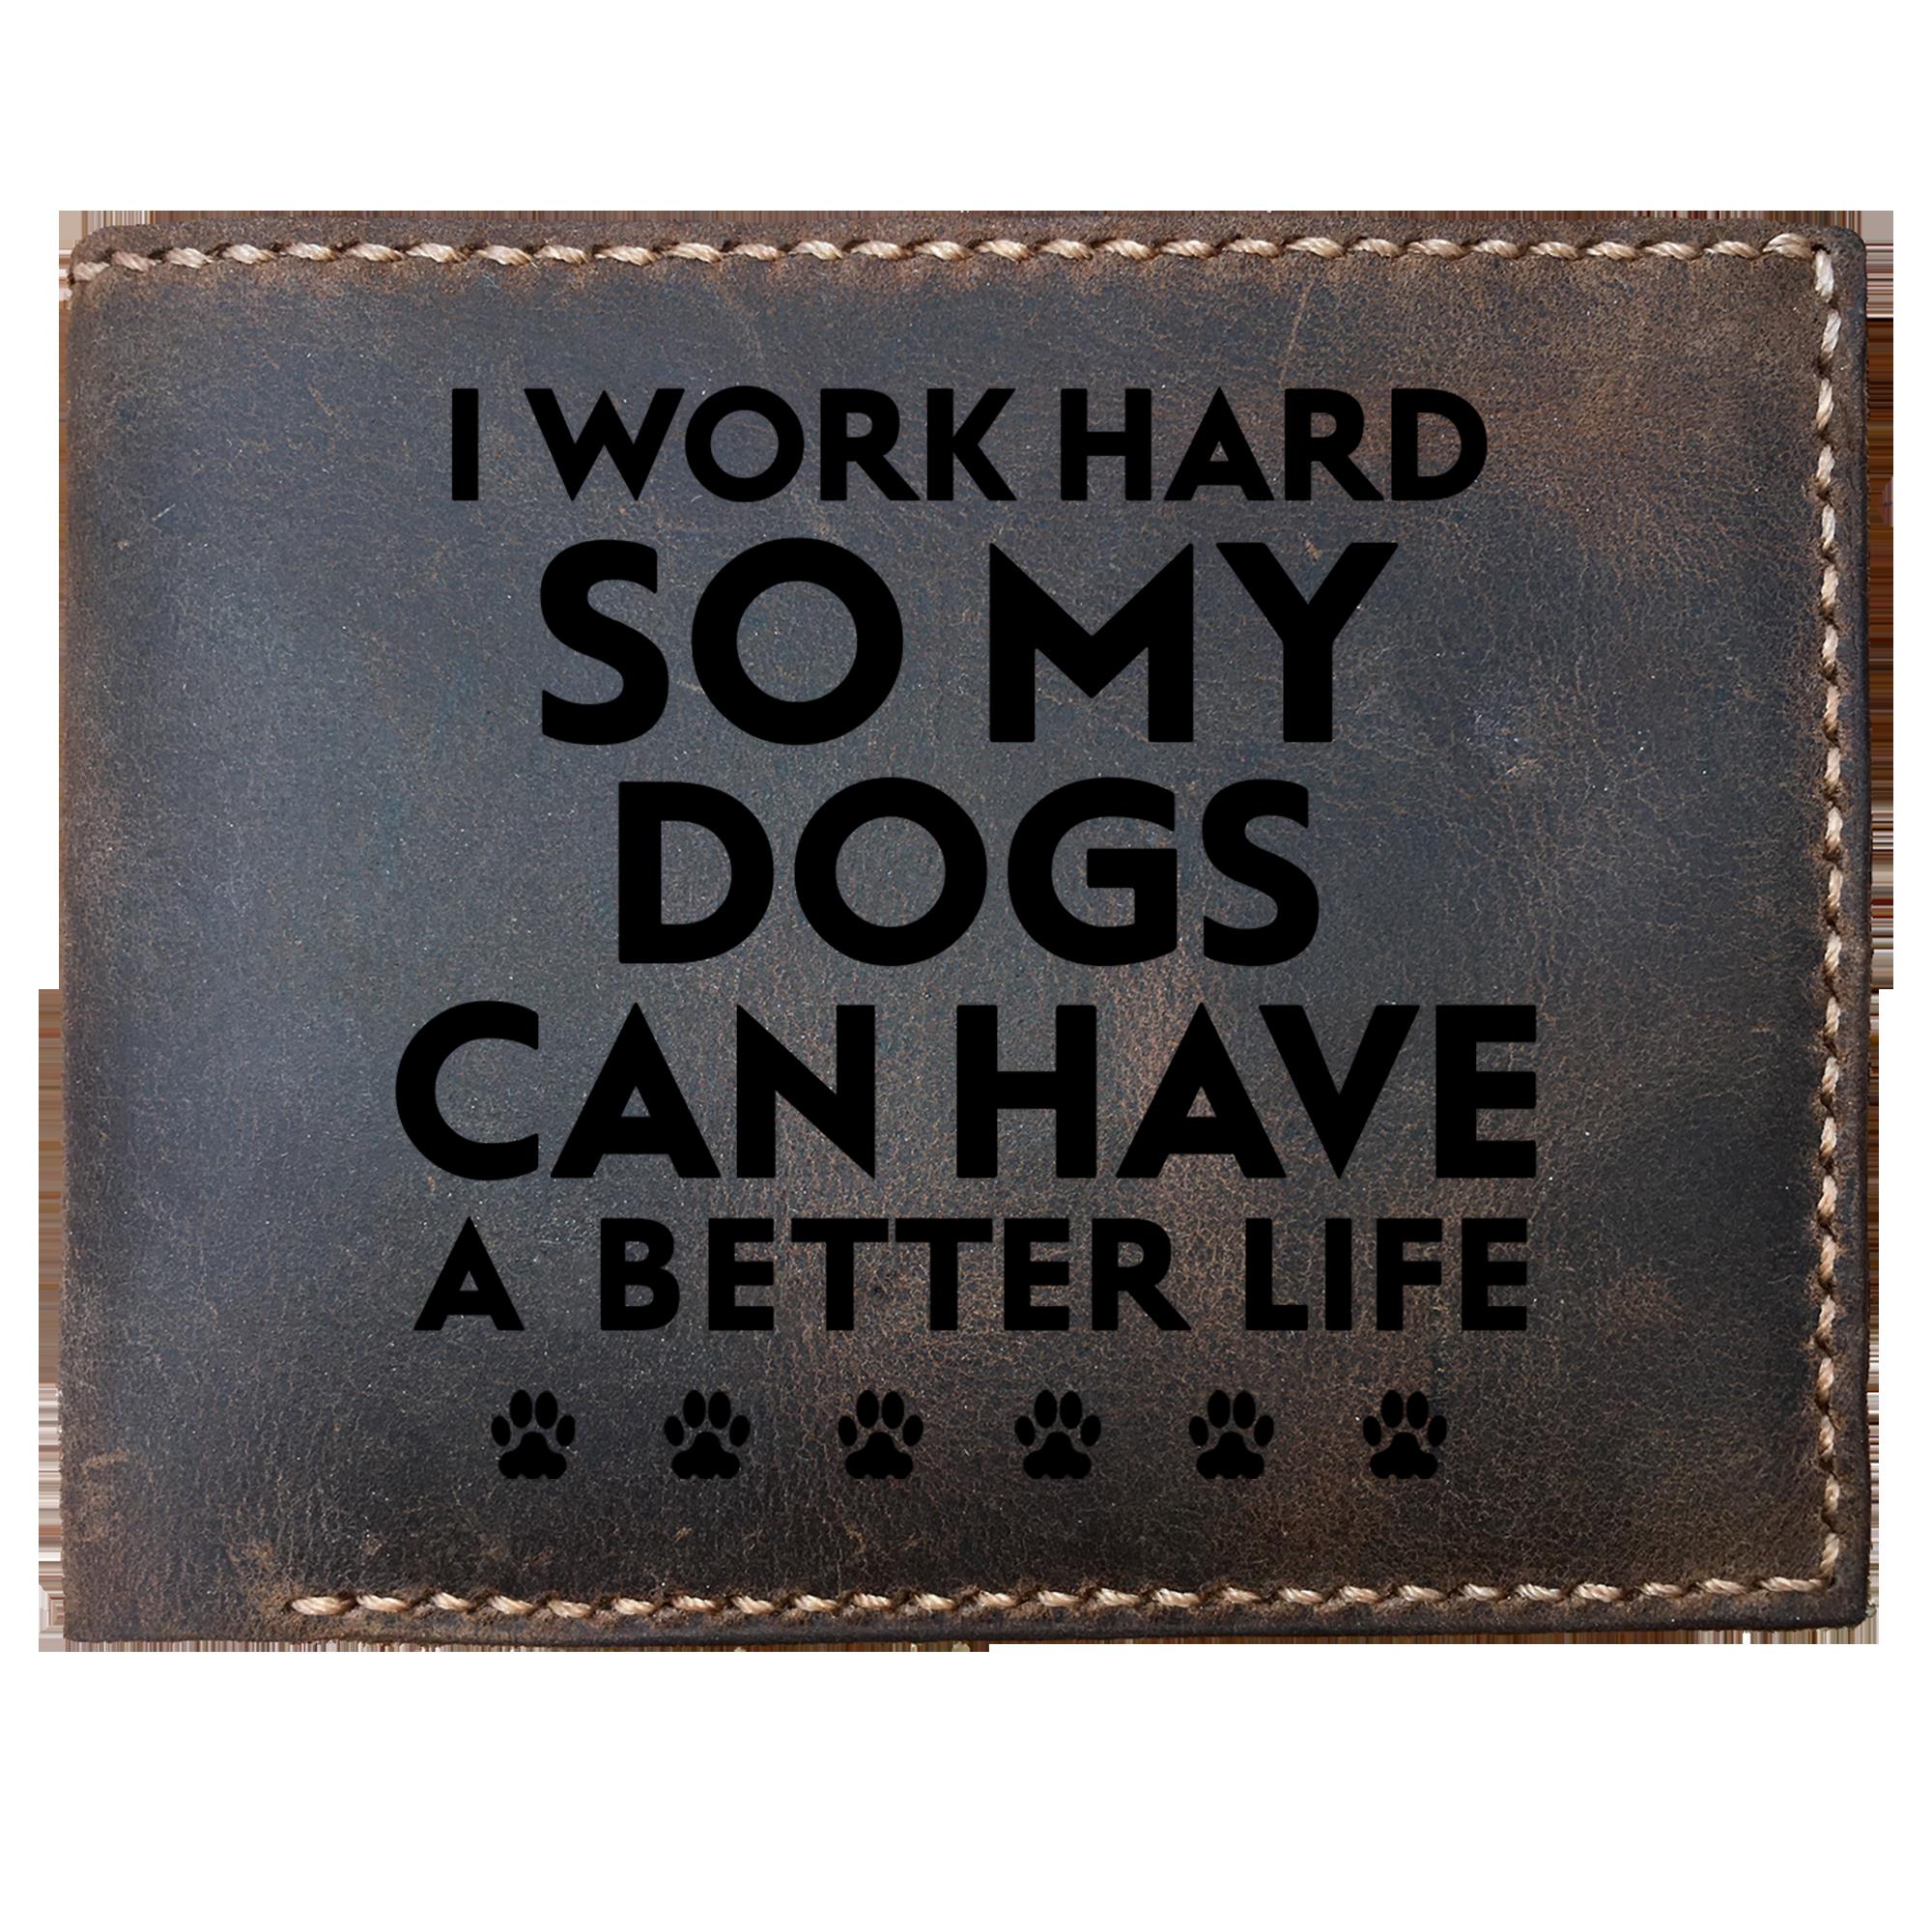 Skitongifts Funny Custom Laser Engraved Bifold Leather Wallet For Men, Funny Dog Quote I Work Hard So My Dogs Can Have A Better Life